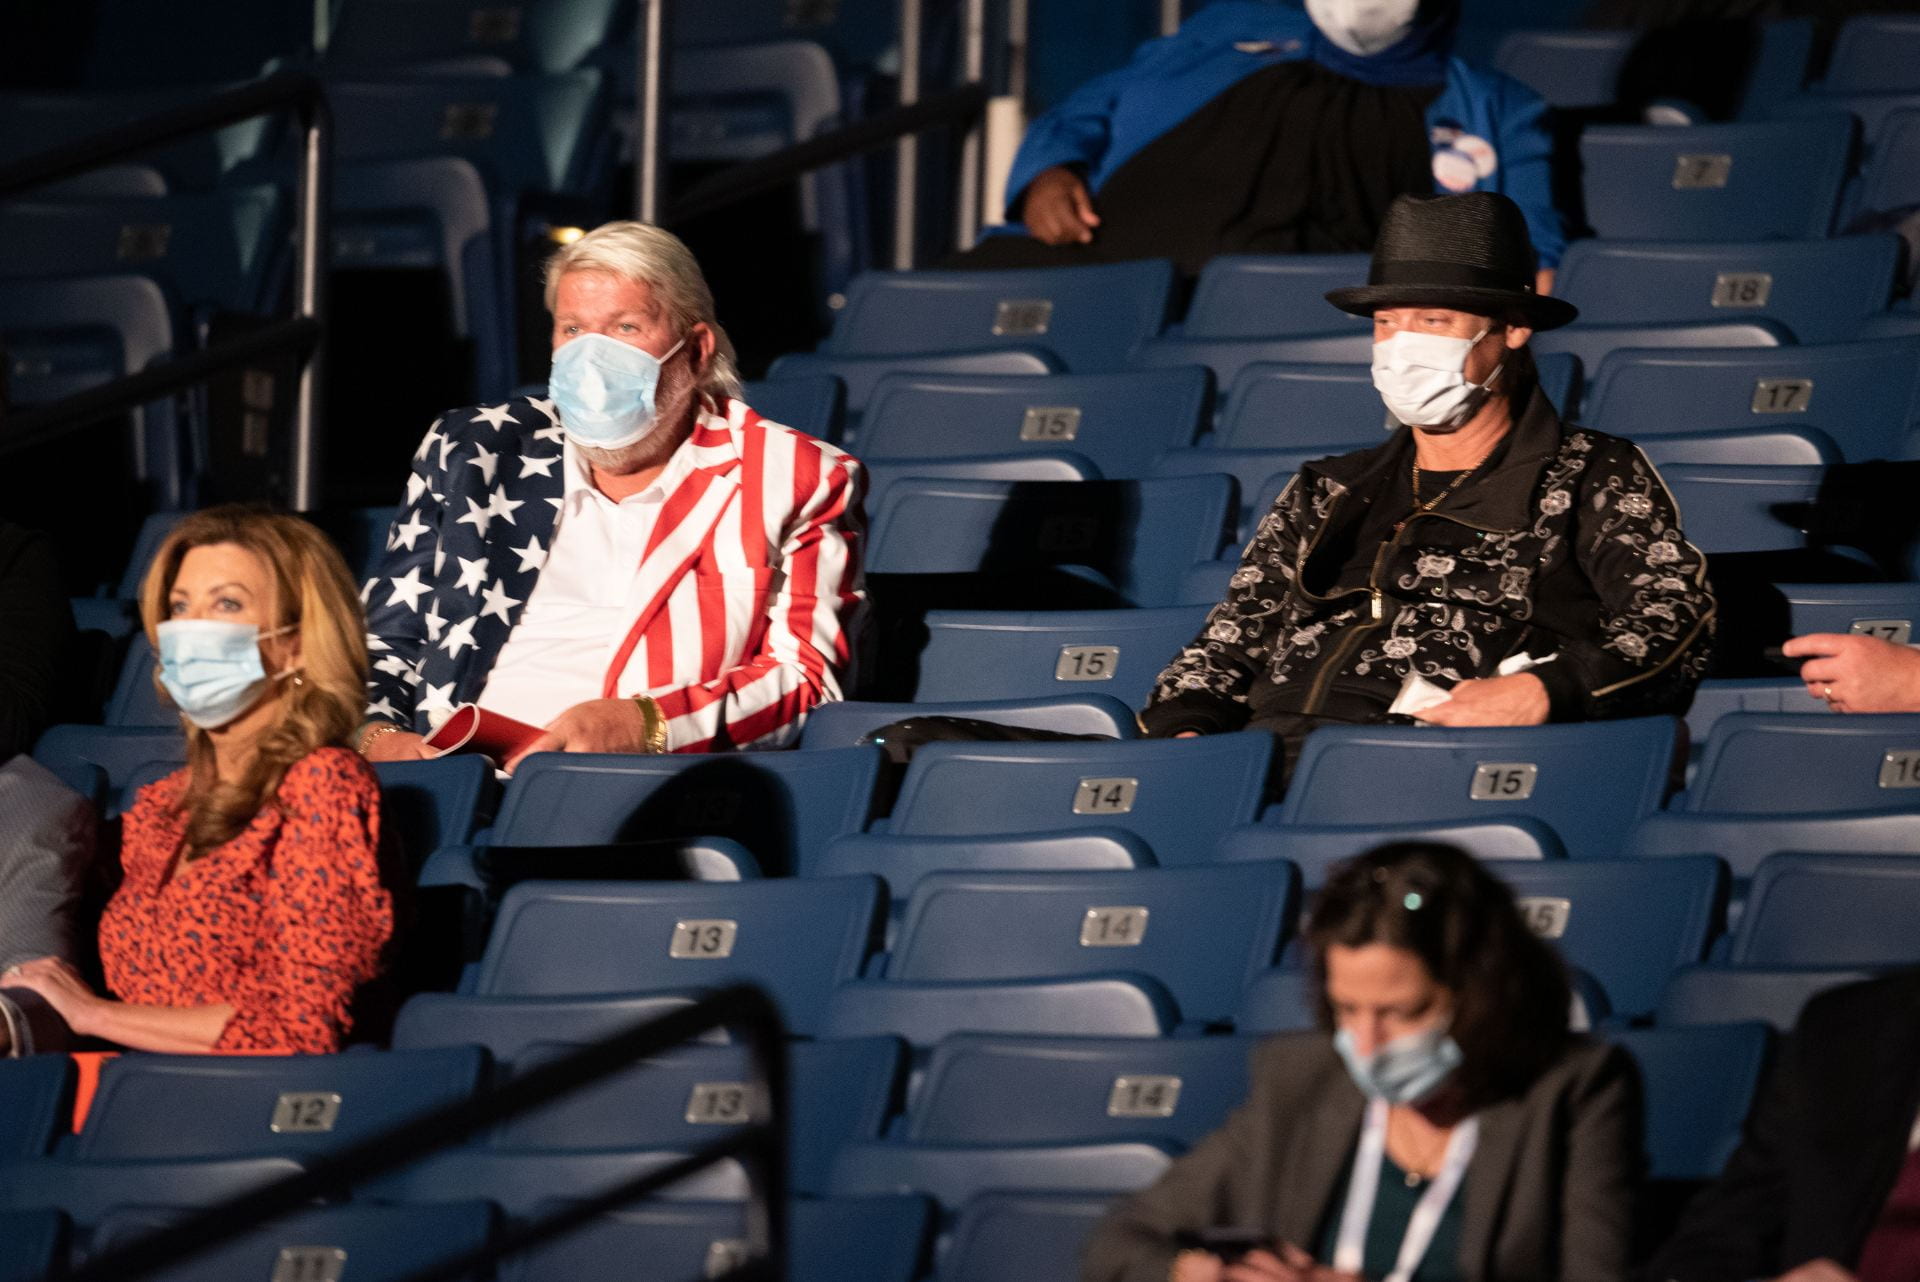 John Daly and Kid Rock talk in the stands before debate